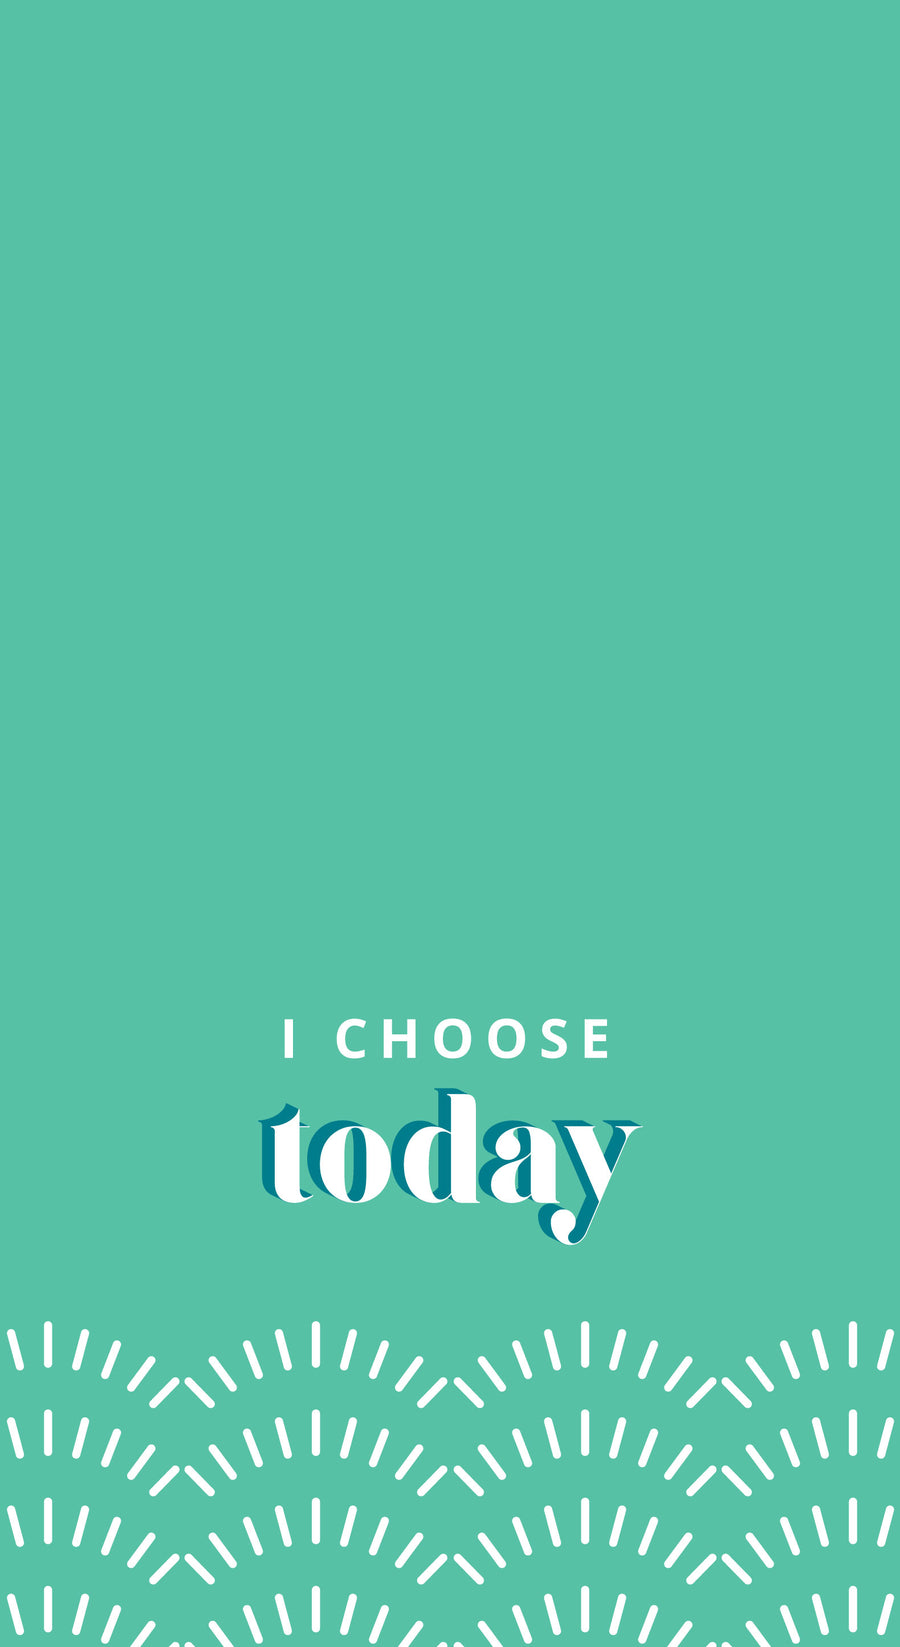 I choose today Phone Wallpaper in the color teal with sunrise graphics at the bottom